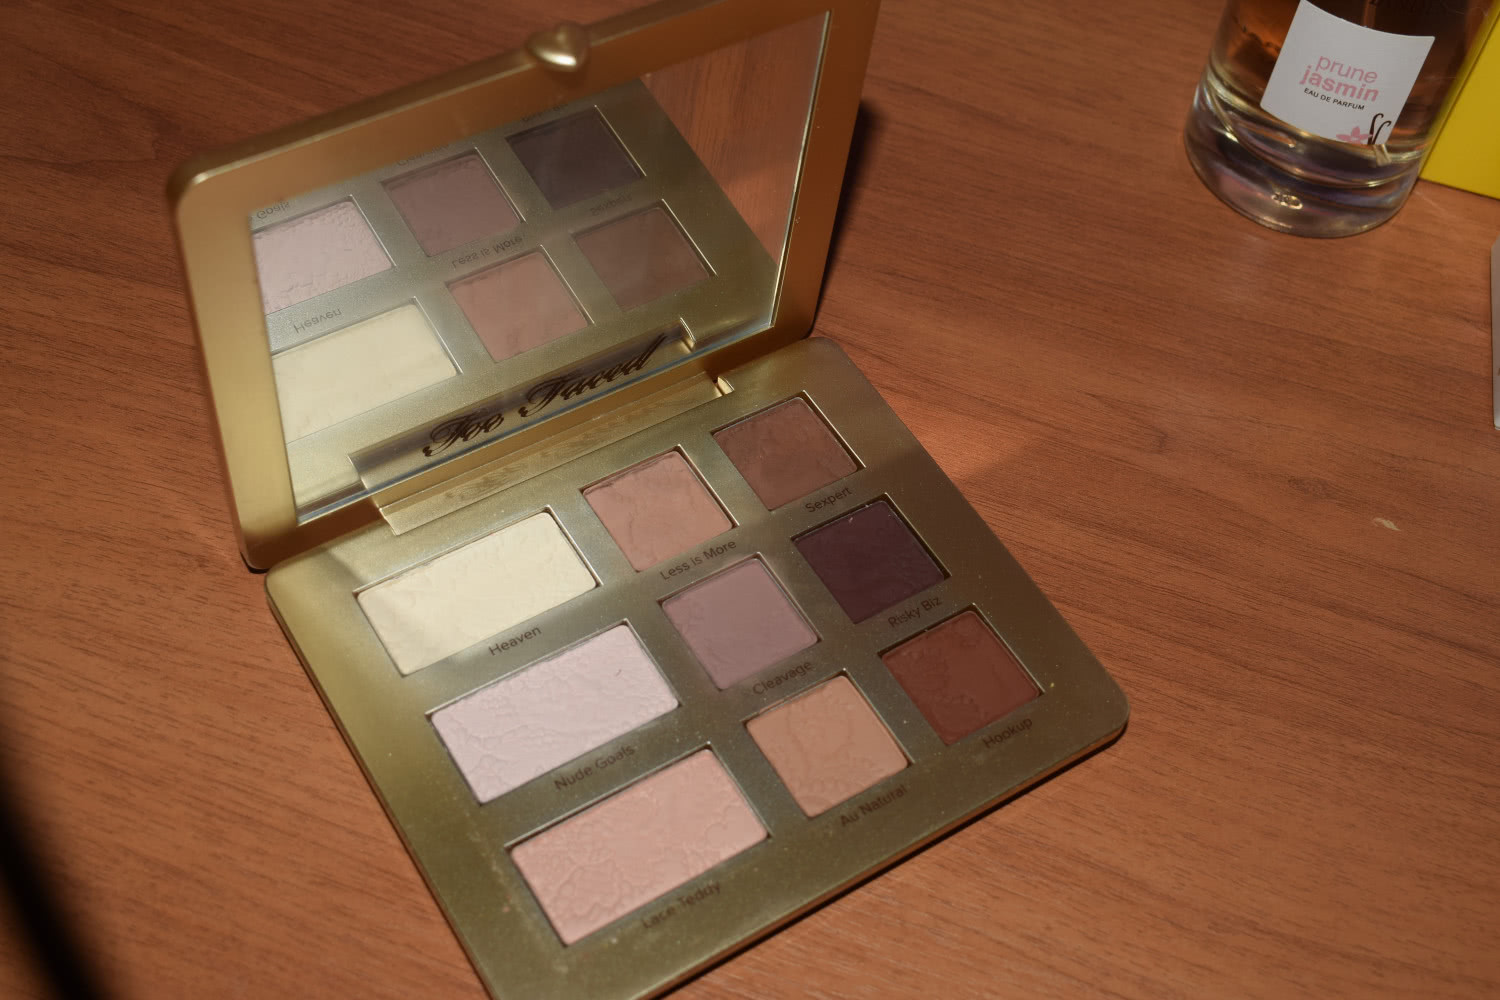 Too Faced Natural Matte Eye Shadow Palette